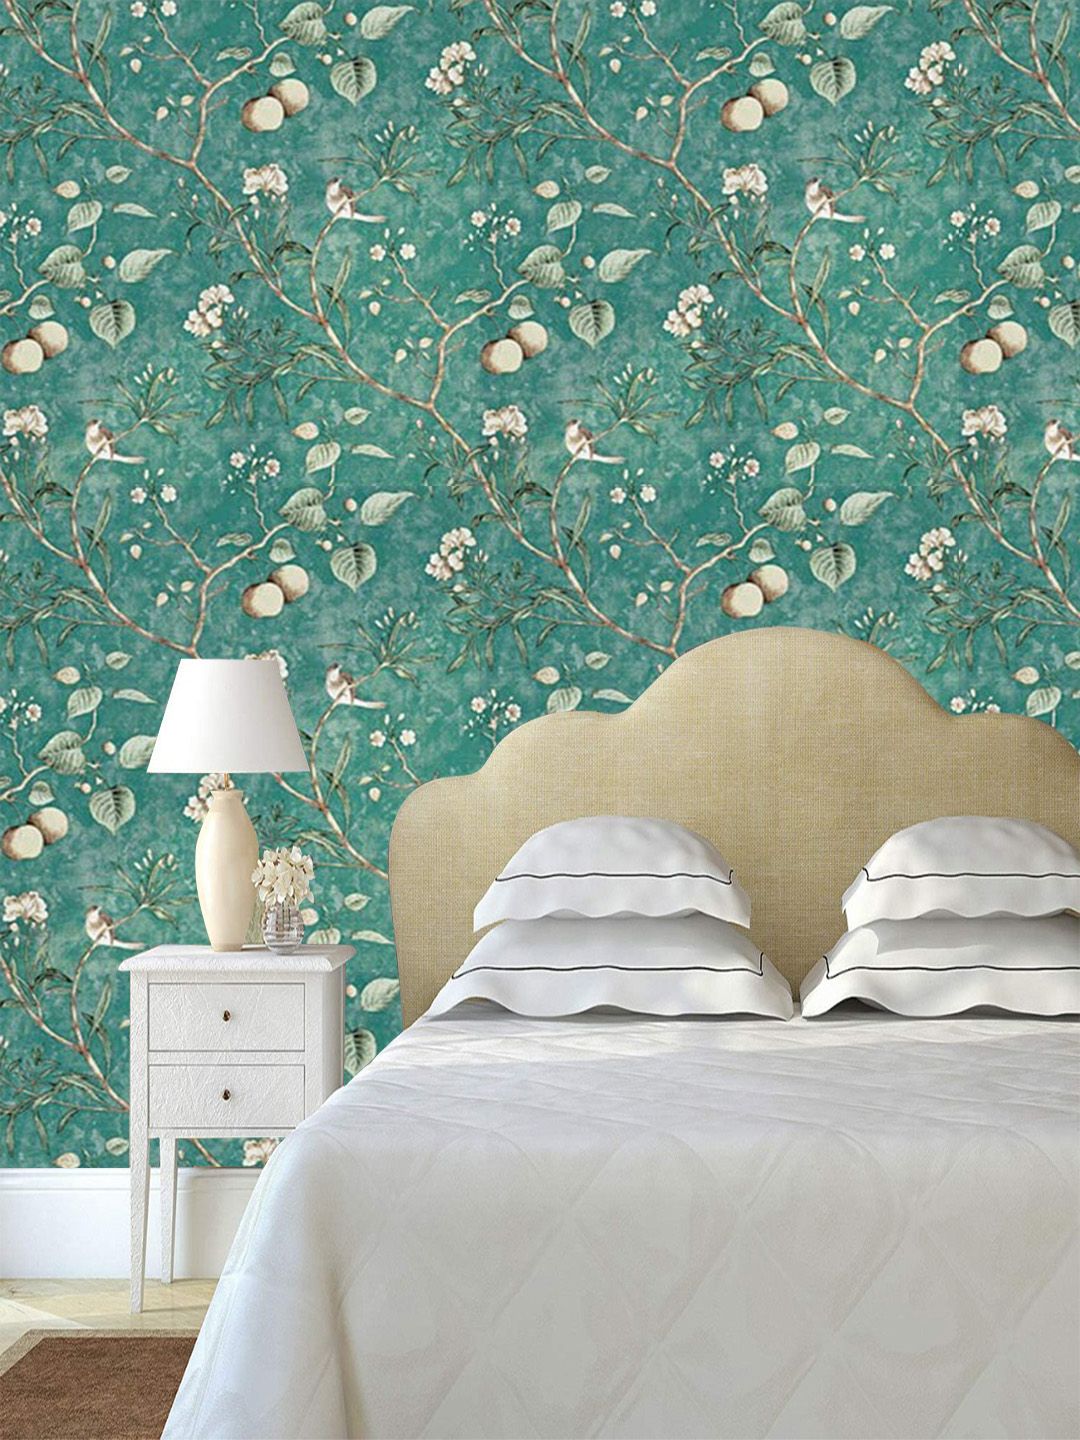 Jaamso Royals Green & Off-White Vintage Flower Self Adhesive Removable Wallpaper Price in India